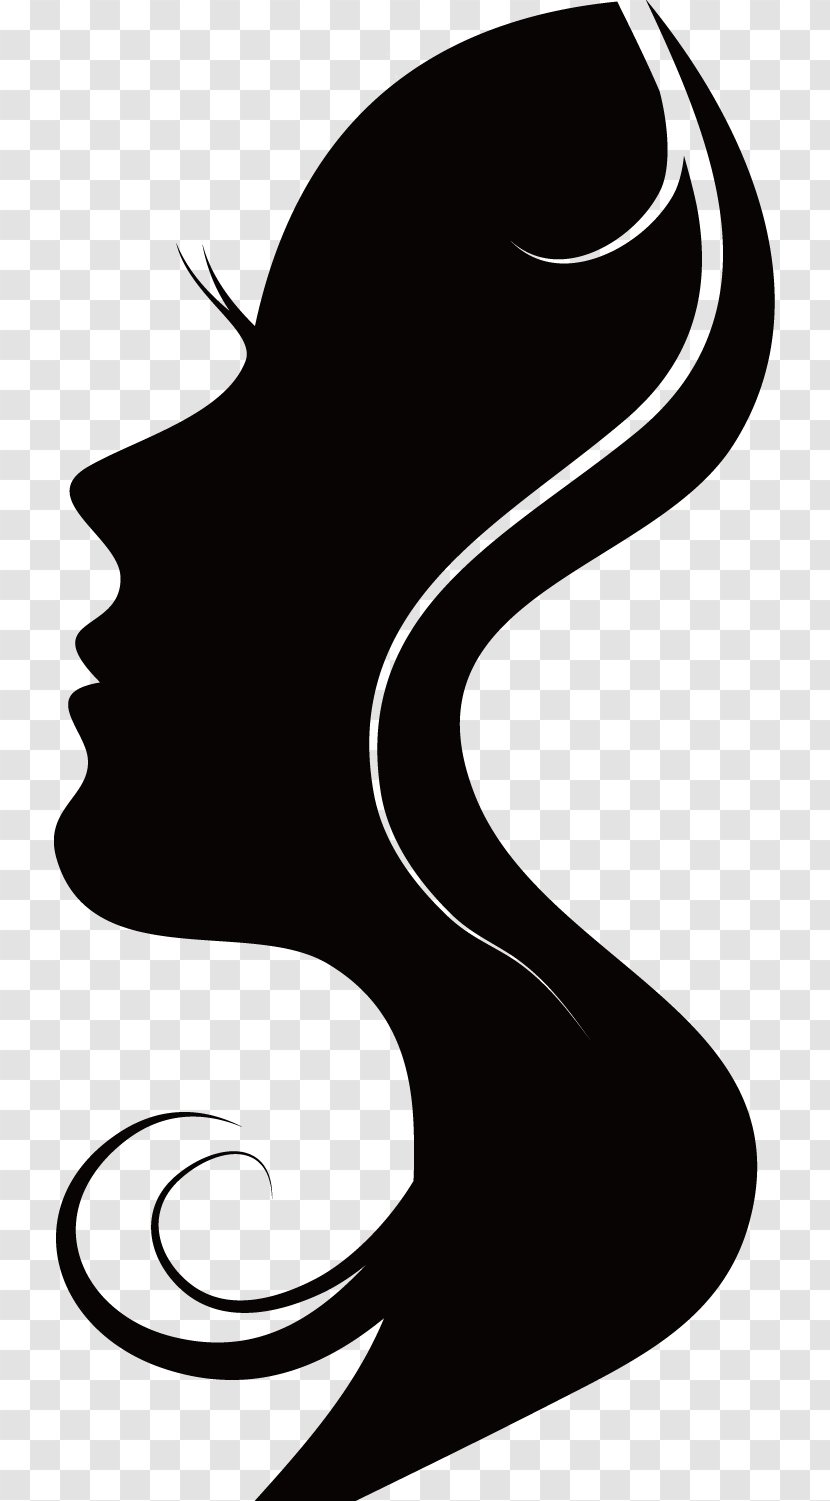 Silhouette Woman - Black - Silhouettes Transparent PNG